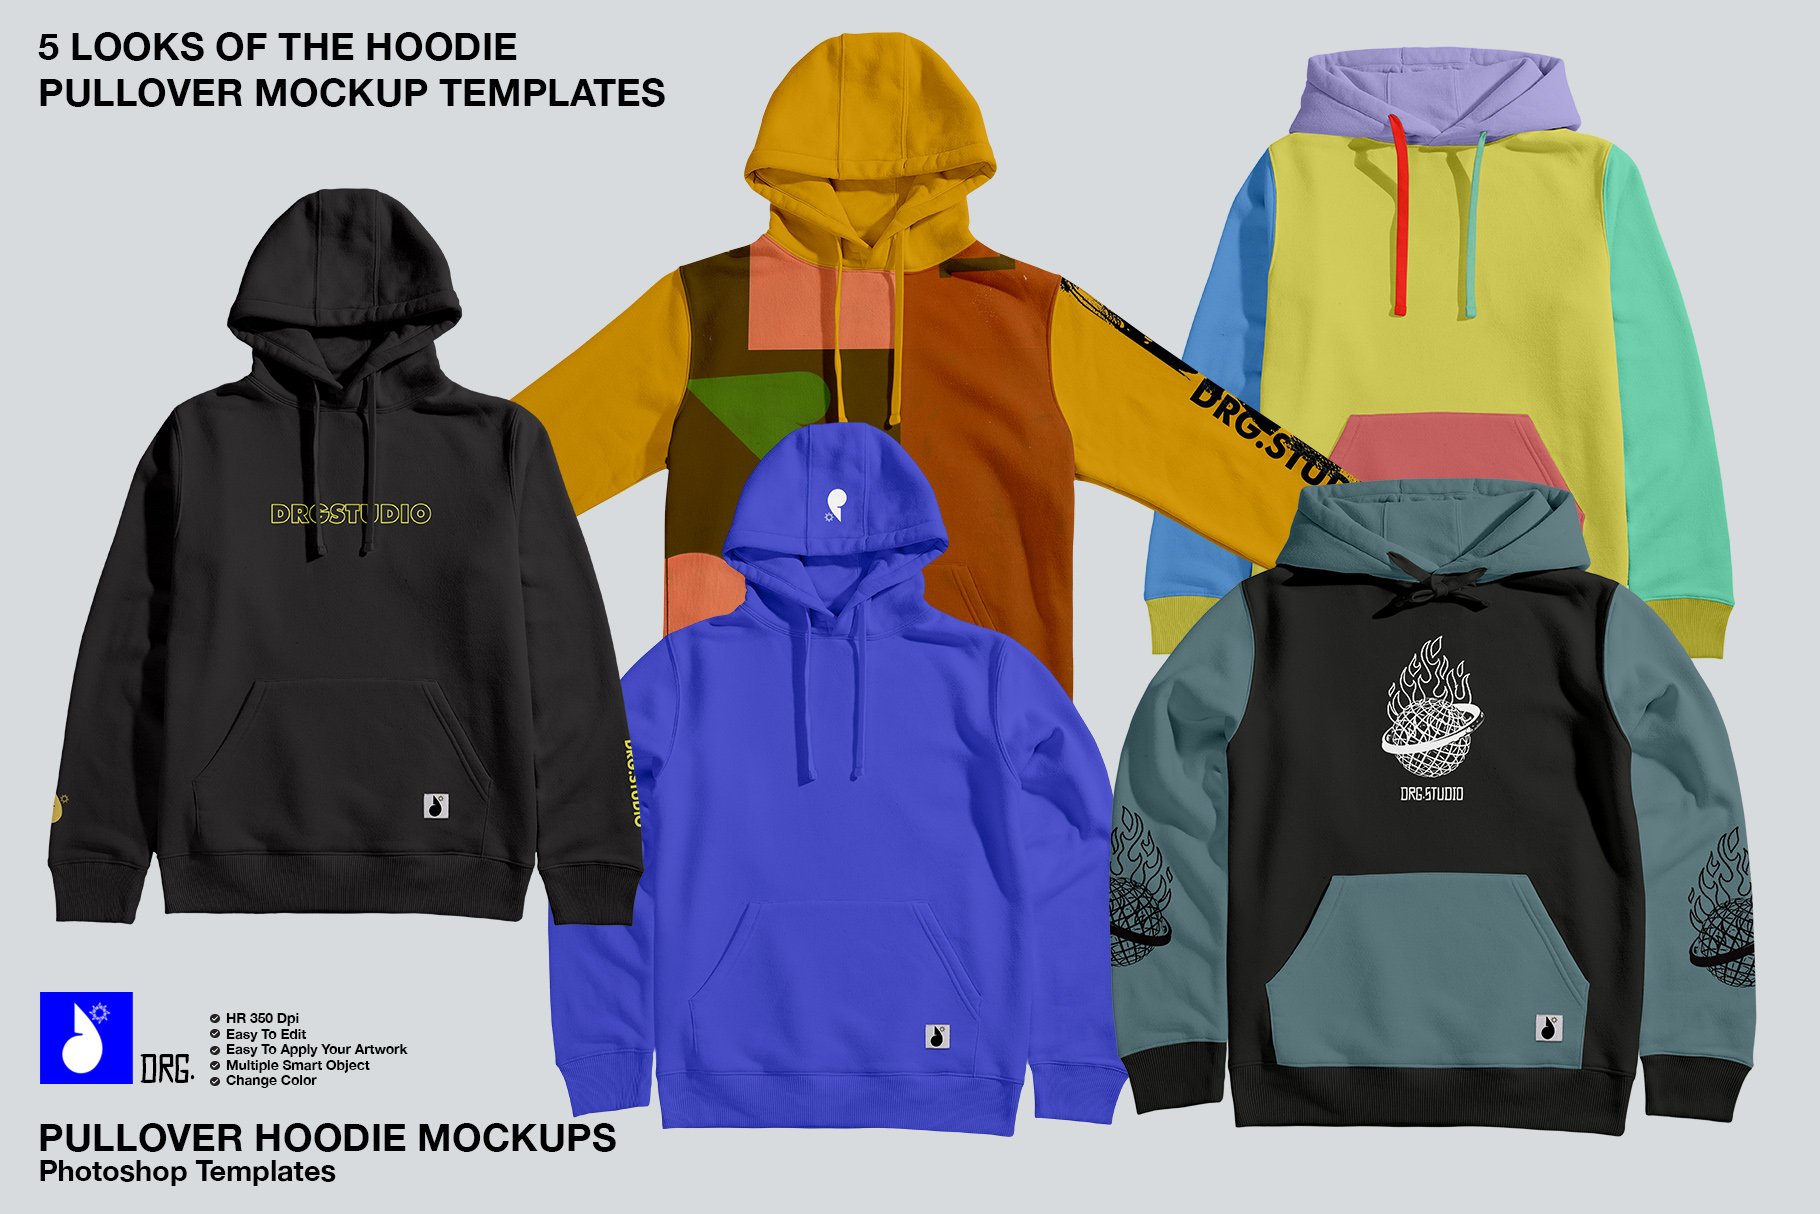 Pullover Hoodie Mockups Vol 2 cover image.